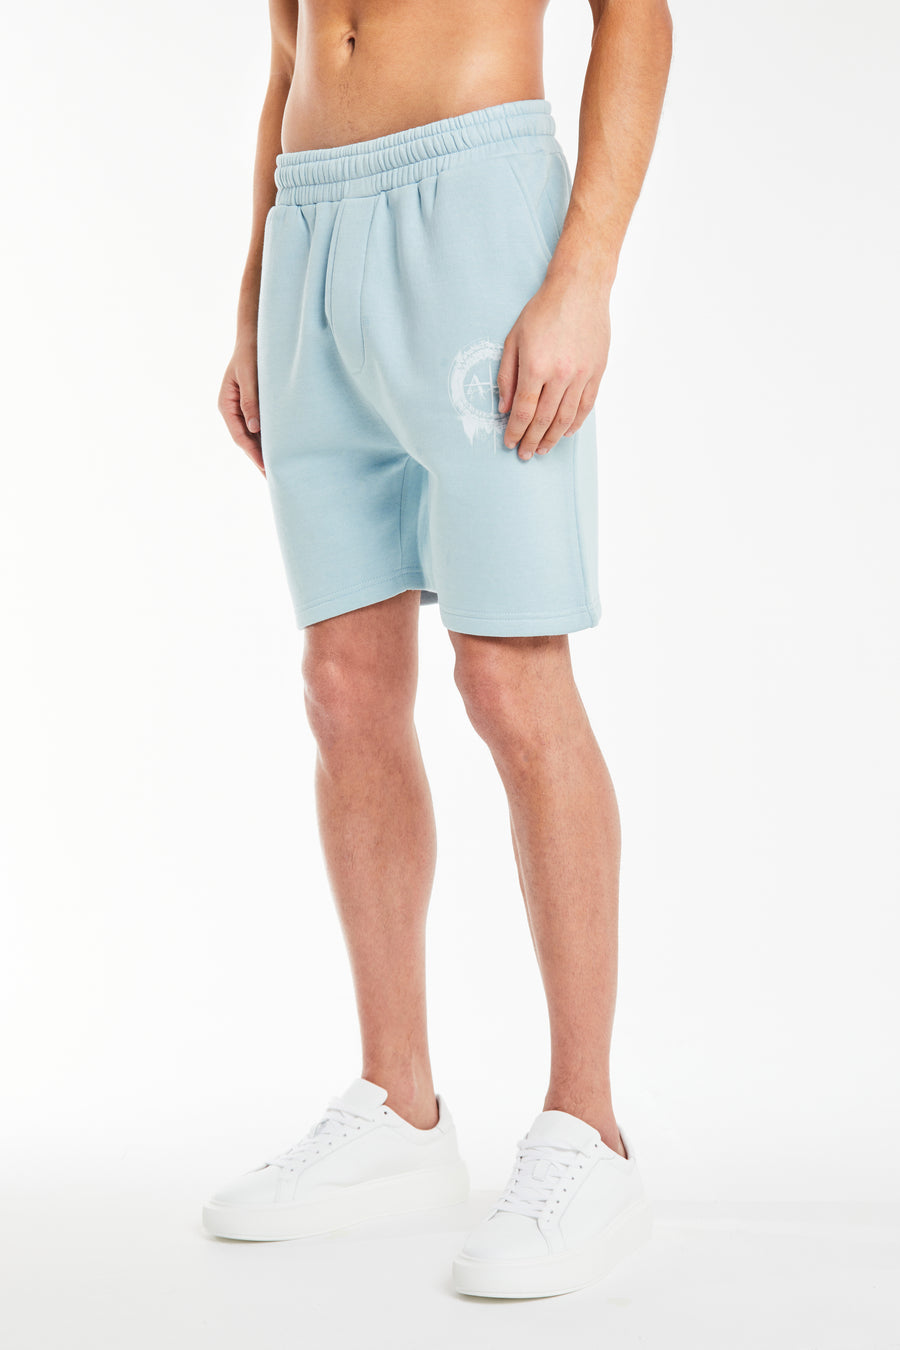 Mens twin shorts sets in blue with 'Avant Garde' logo